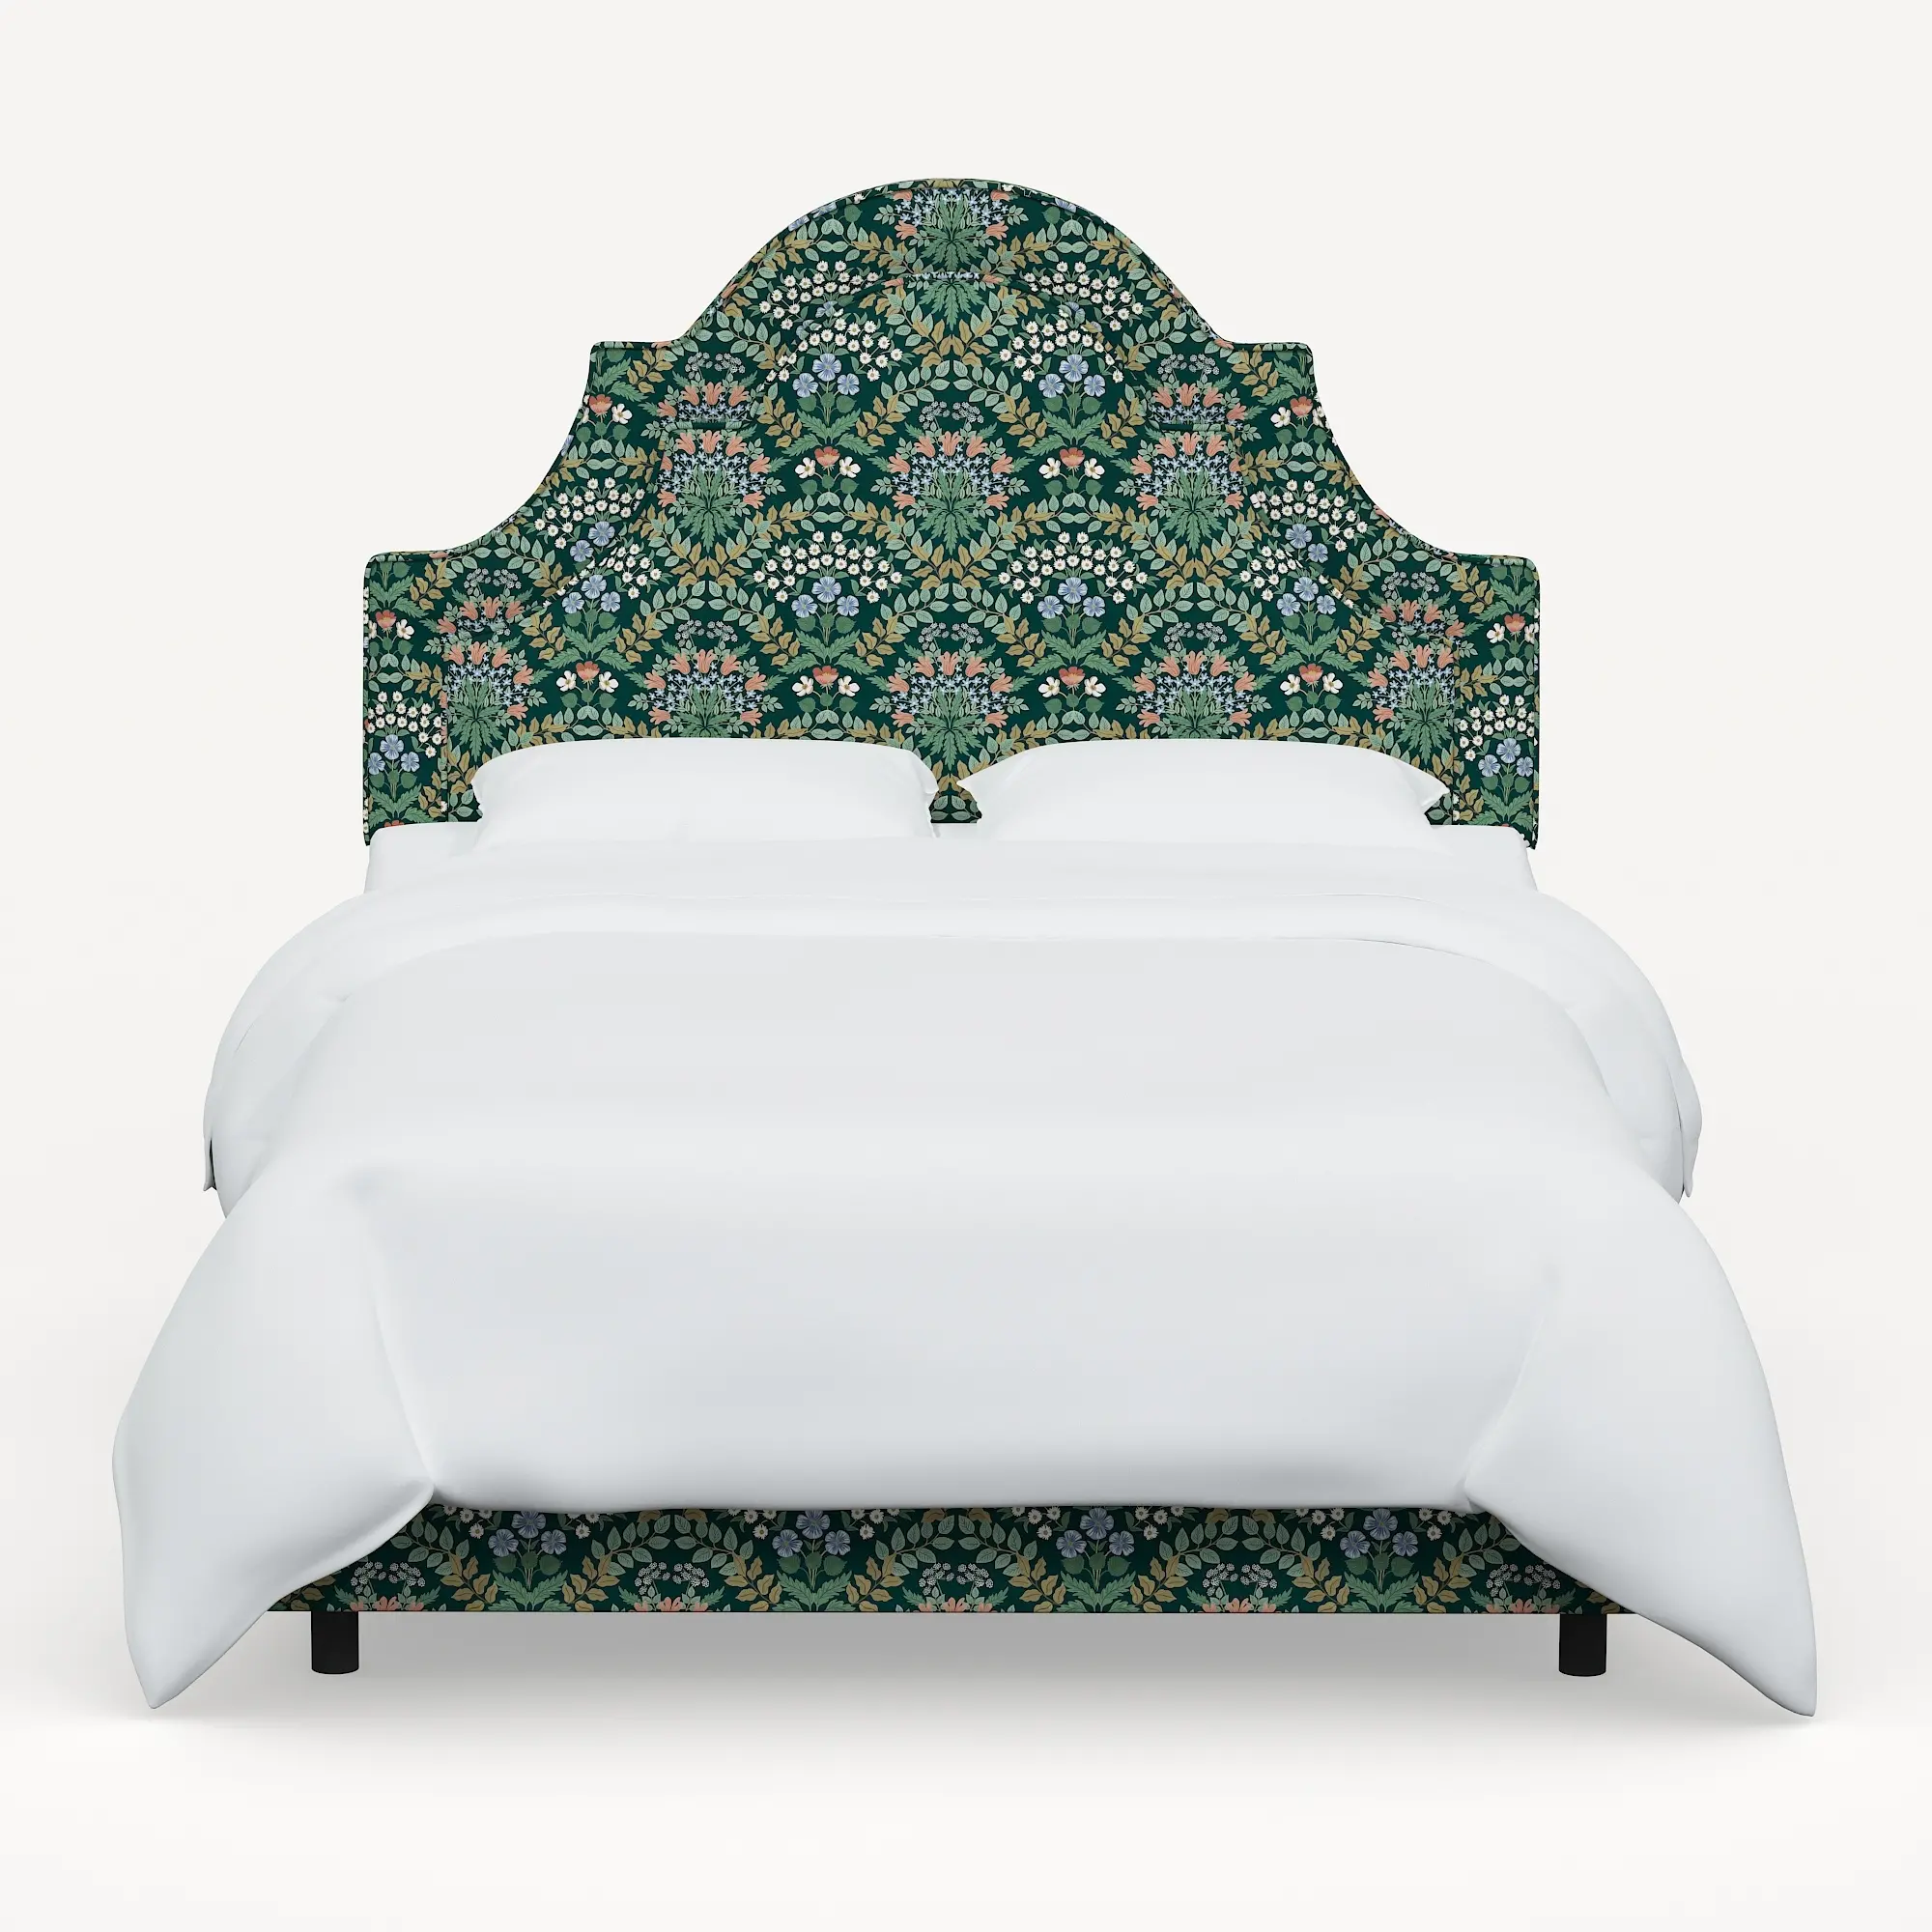 https://static.rcwilley.com/products/113037848/Rifle-Paper-Co.-Marion-Bramble-Emerald-Twin-Bed-rcwilley-image1.webp